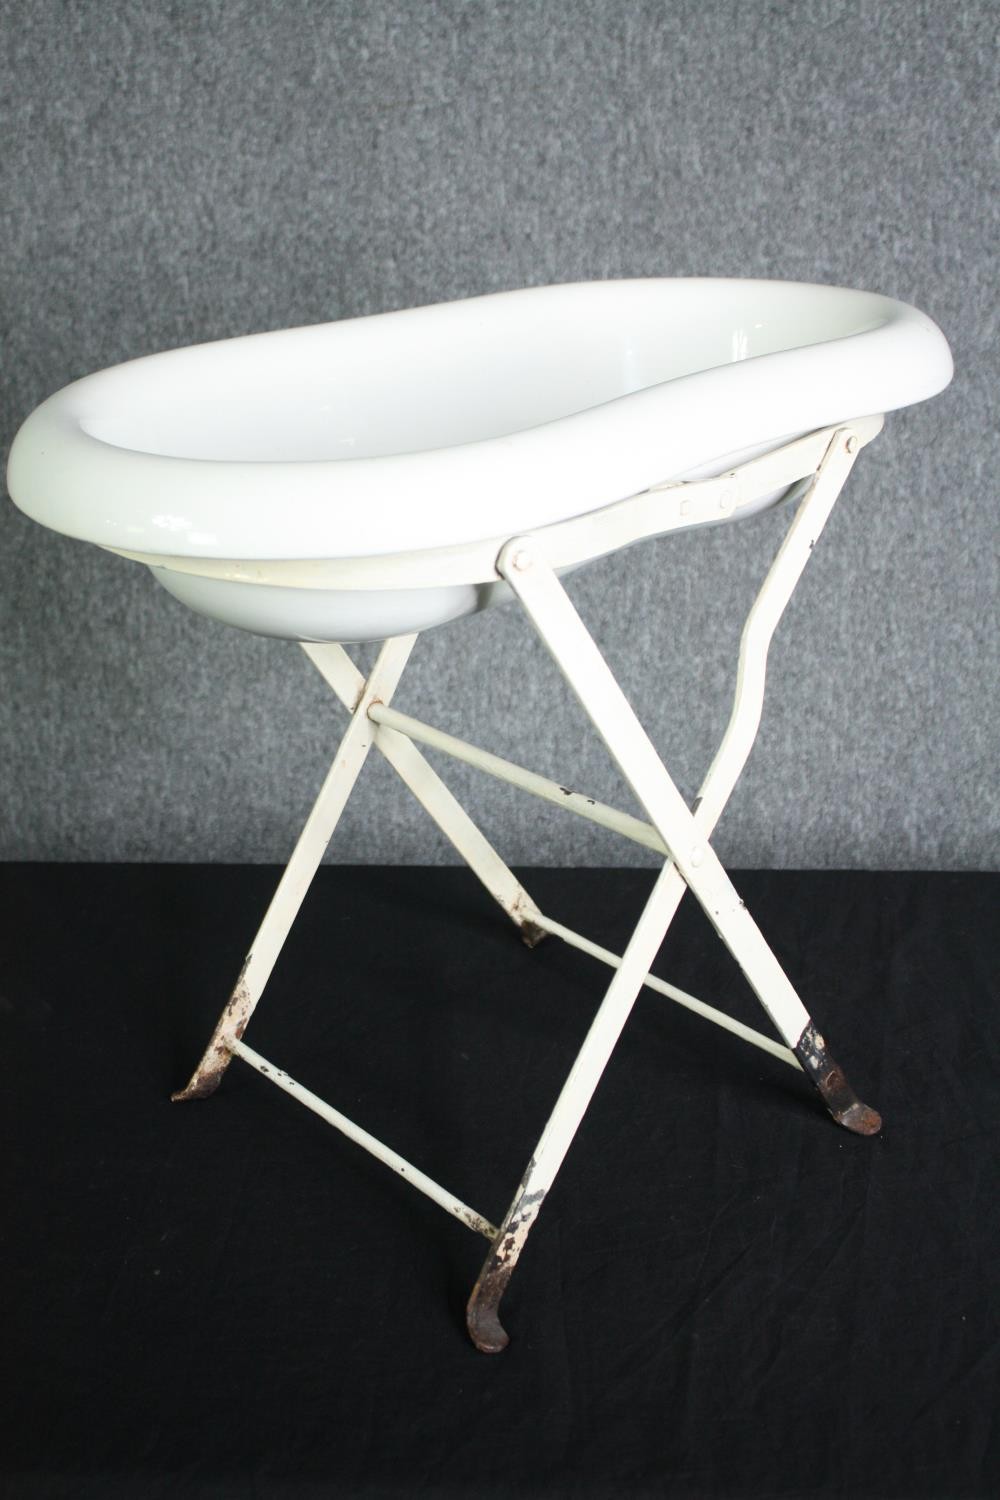 A late 19th century French porcelain baby or footbath on metal stand. H.44 W.50 D.29cm. - Image 4 of 7